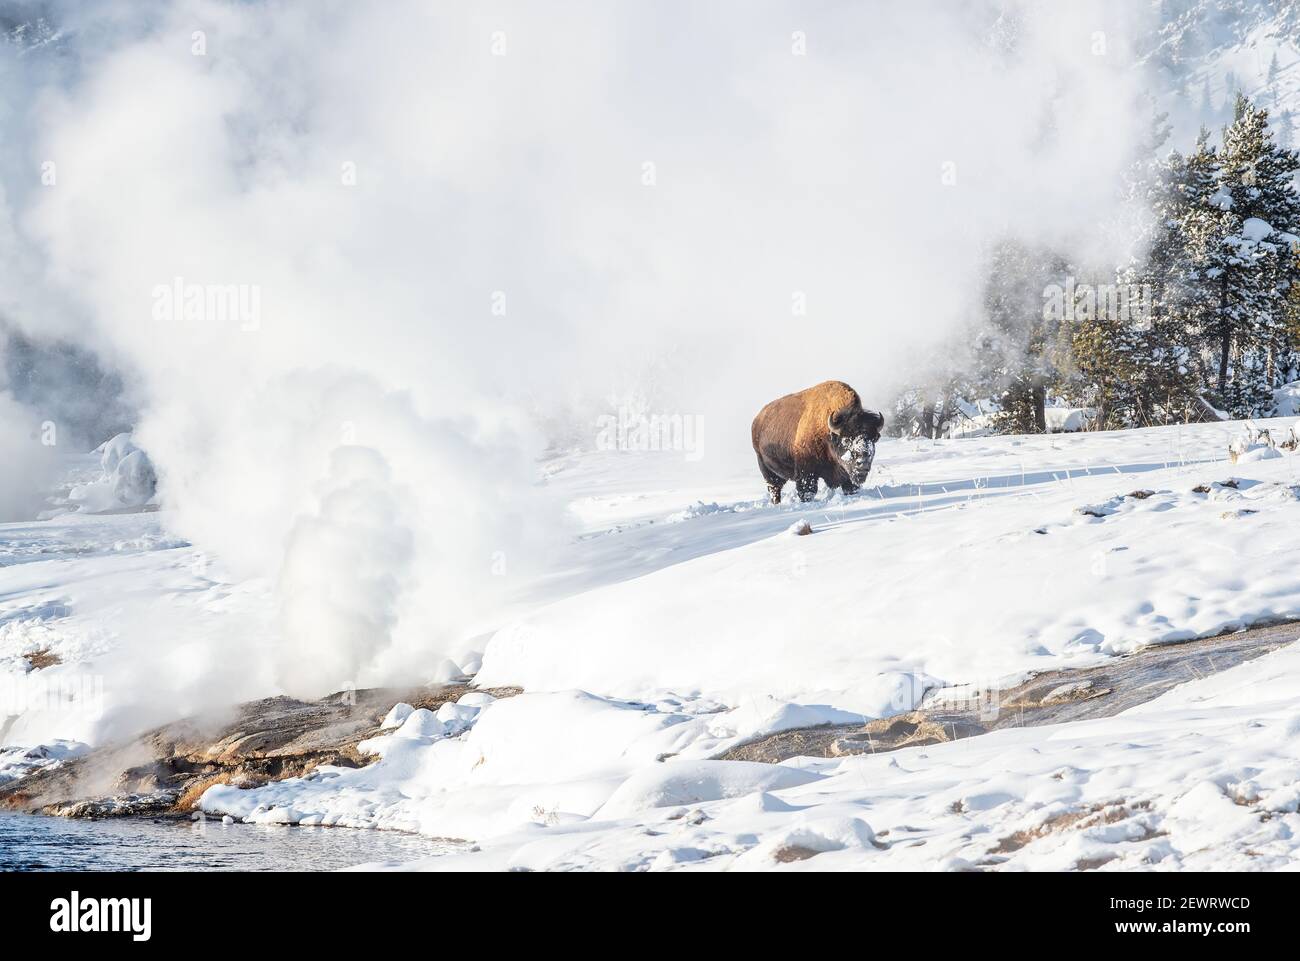 Bison (Bison bison) in snow with geyser, Yellowstone National Park, UNESCO World Heritage Site, Wyoming, United States of America, North America Stock Photo